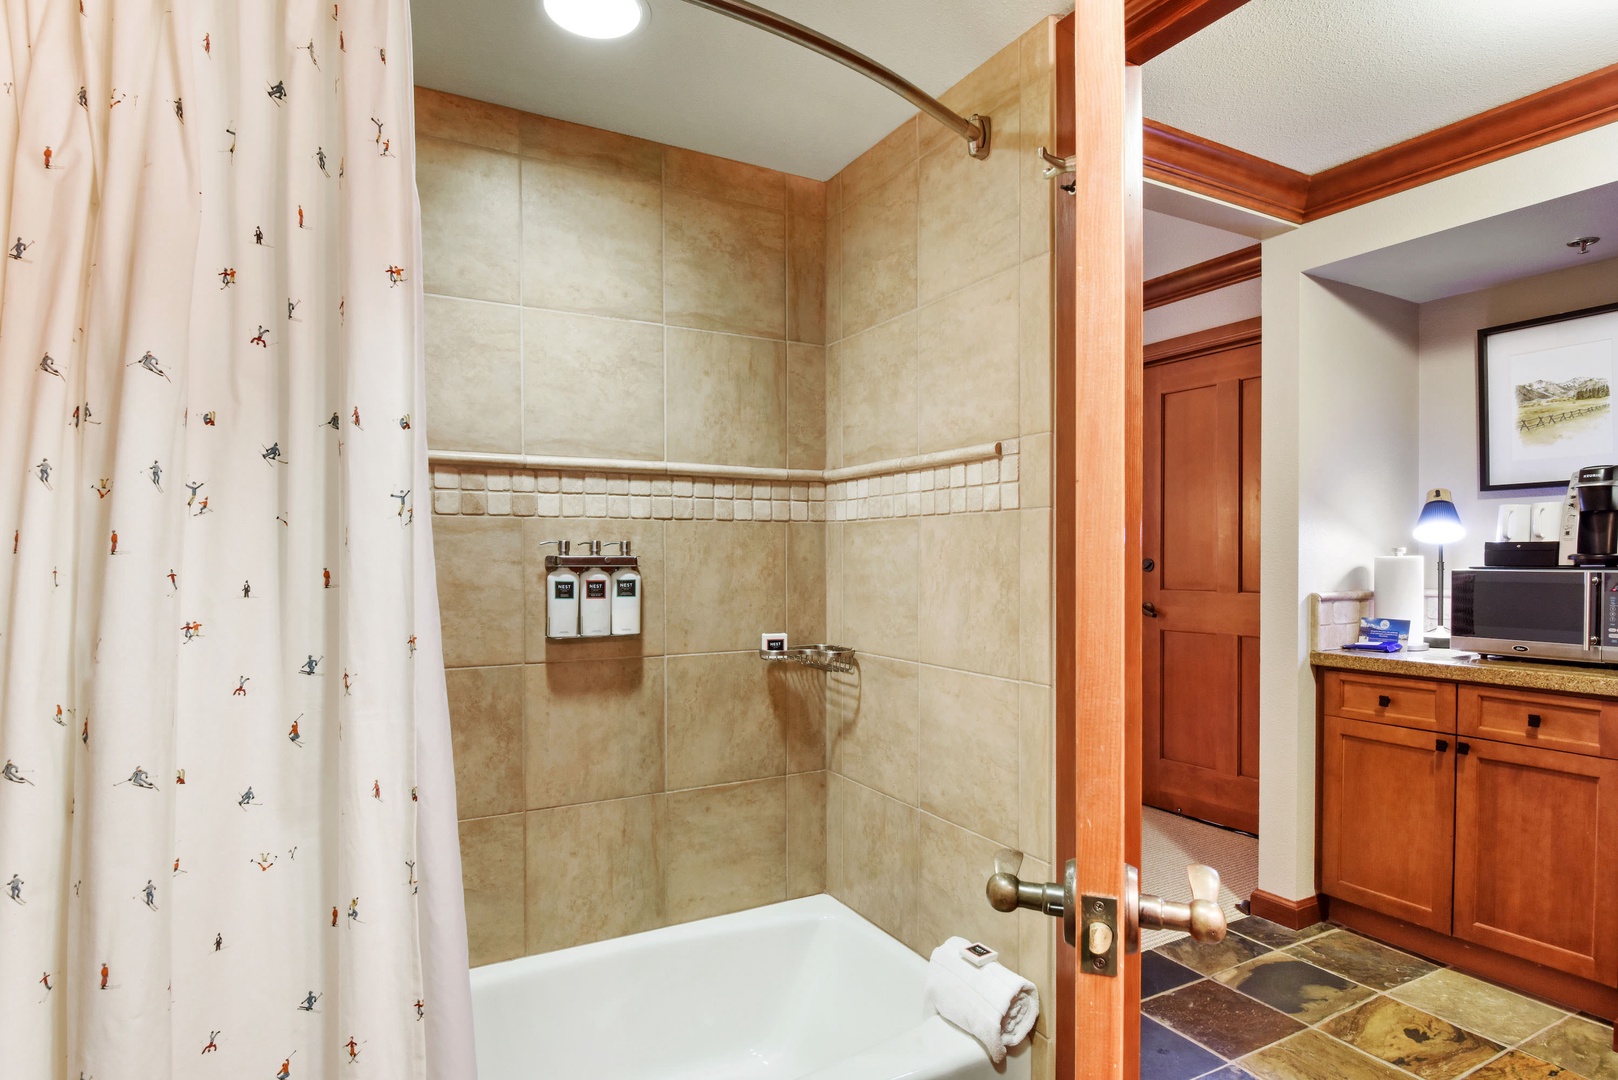 2nd full bathroom with shower/tub combo